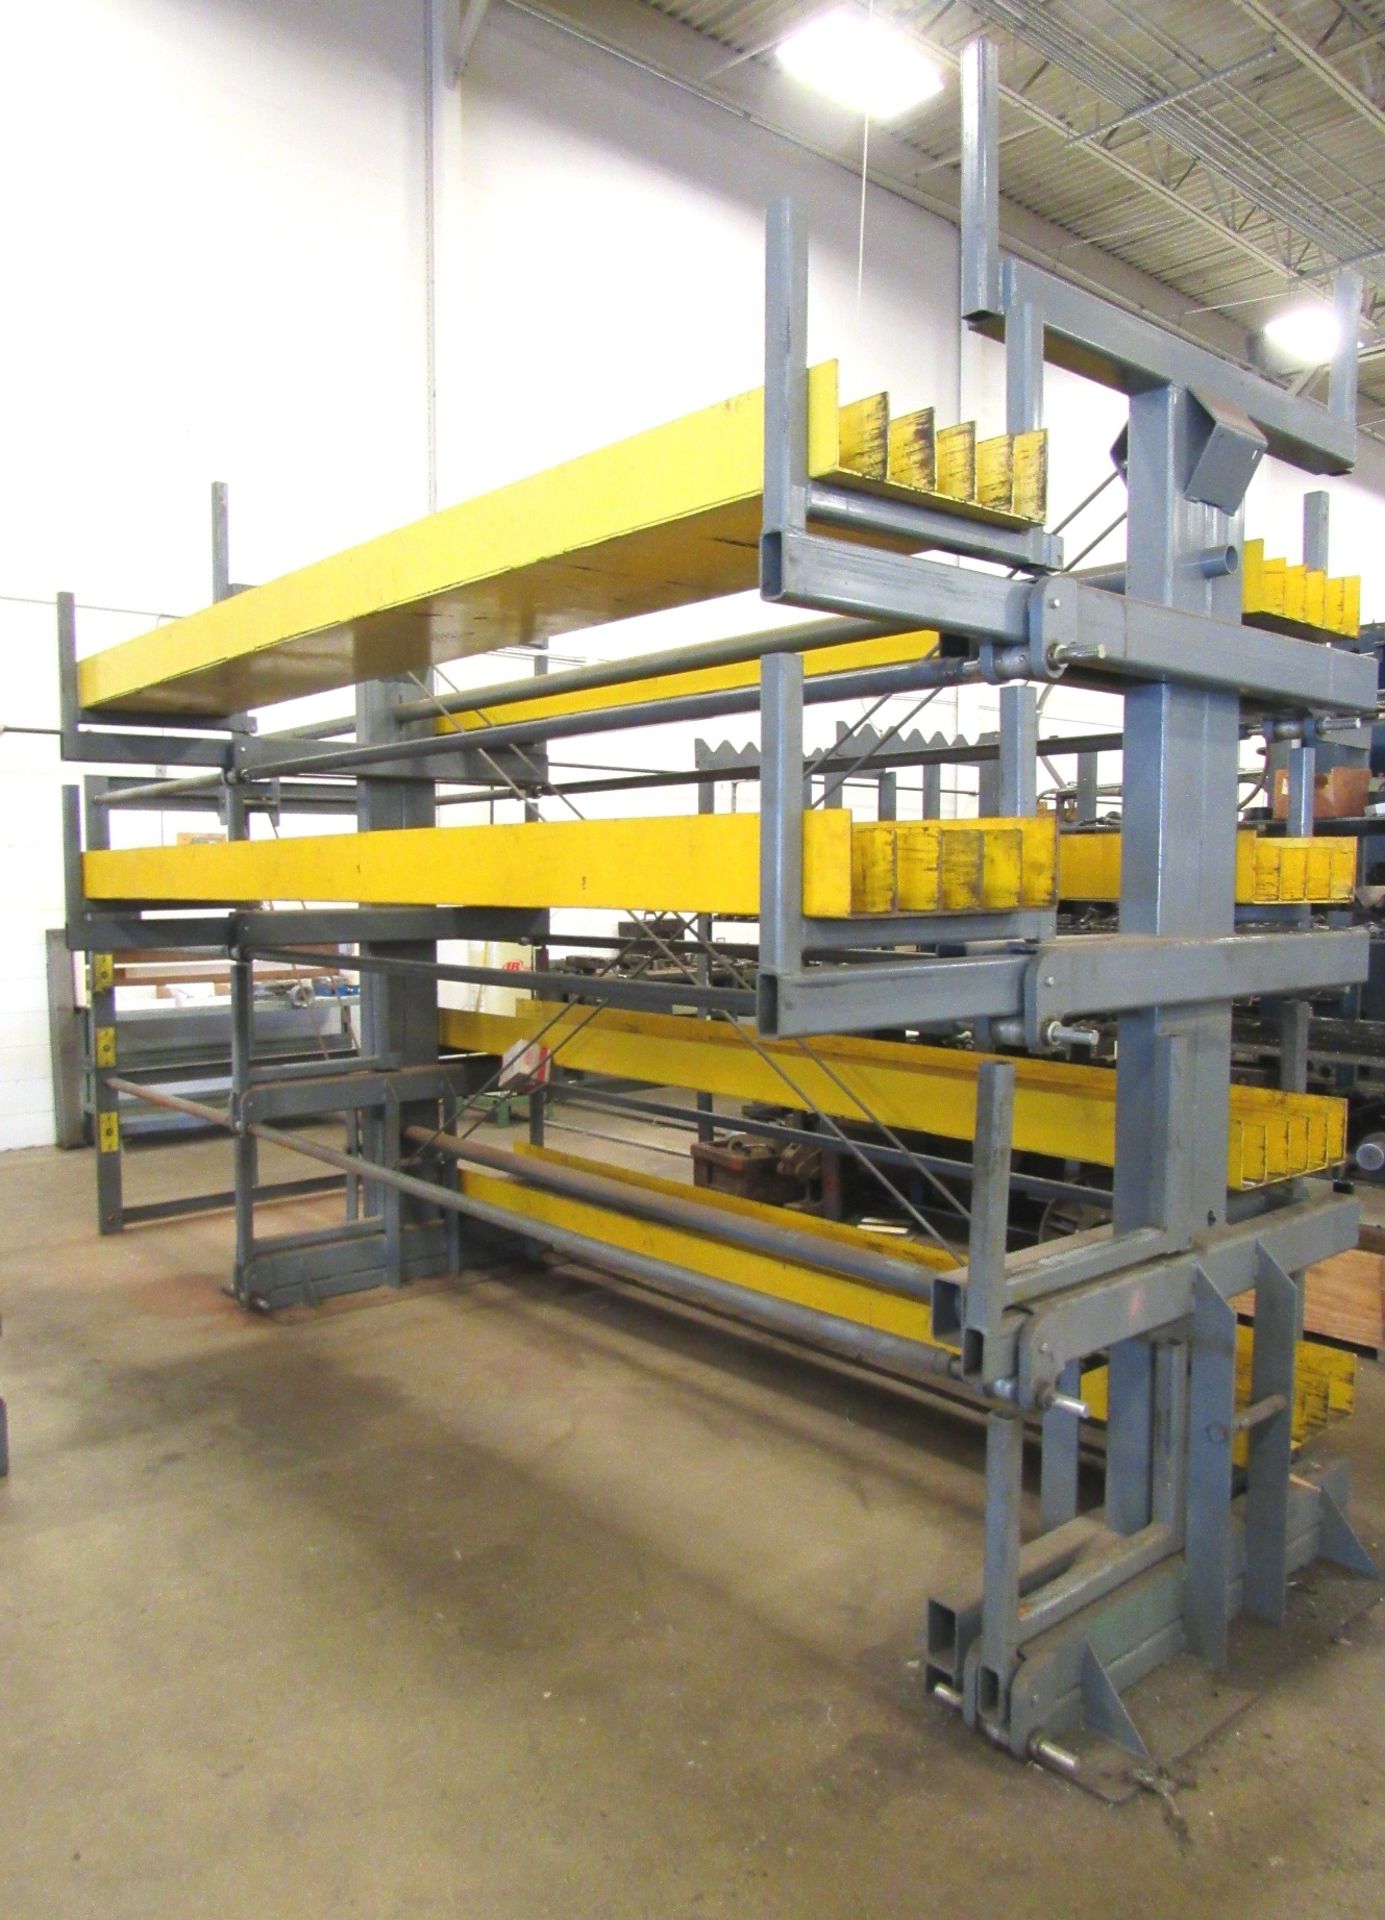 Steel Storage Sytems Mod. 4T-2G-20 x 15R-2 Articulating Material Storage Rack - Image 3 of 5